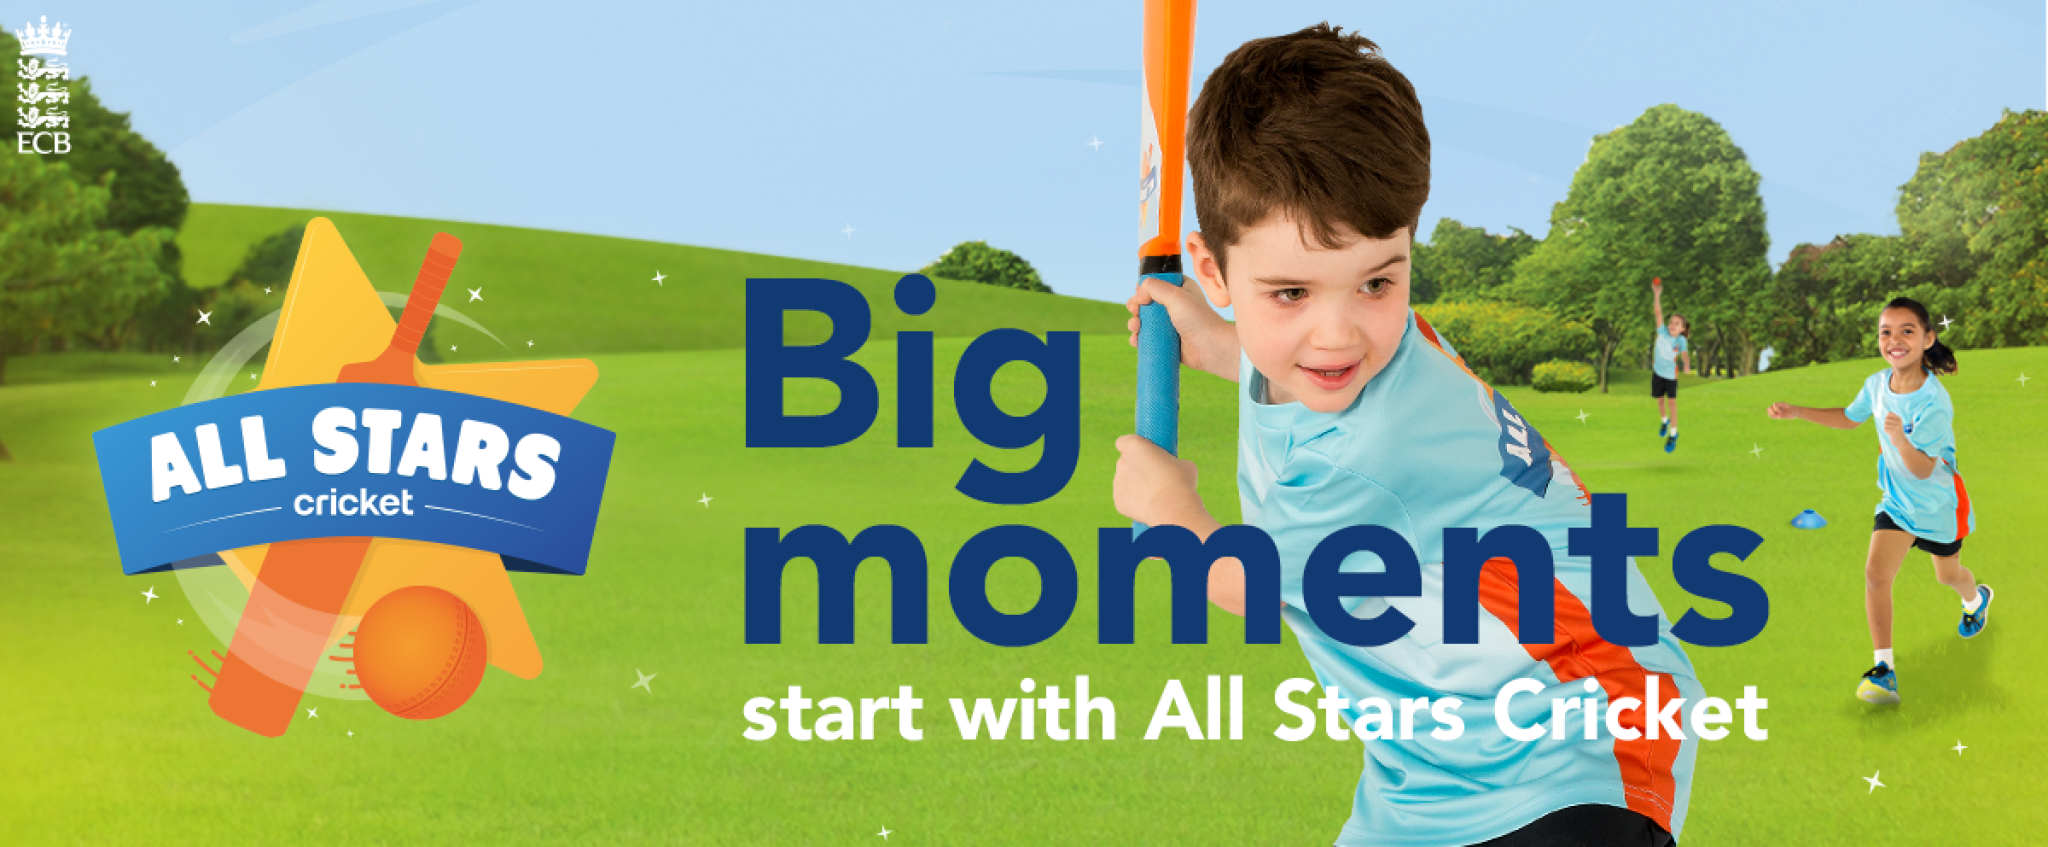 All-stars-banner-without-register-here-strapline.png